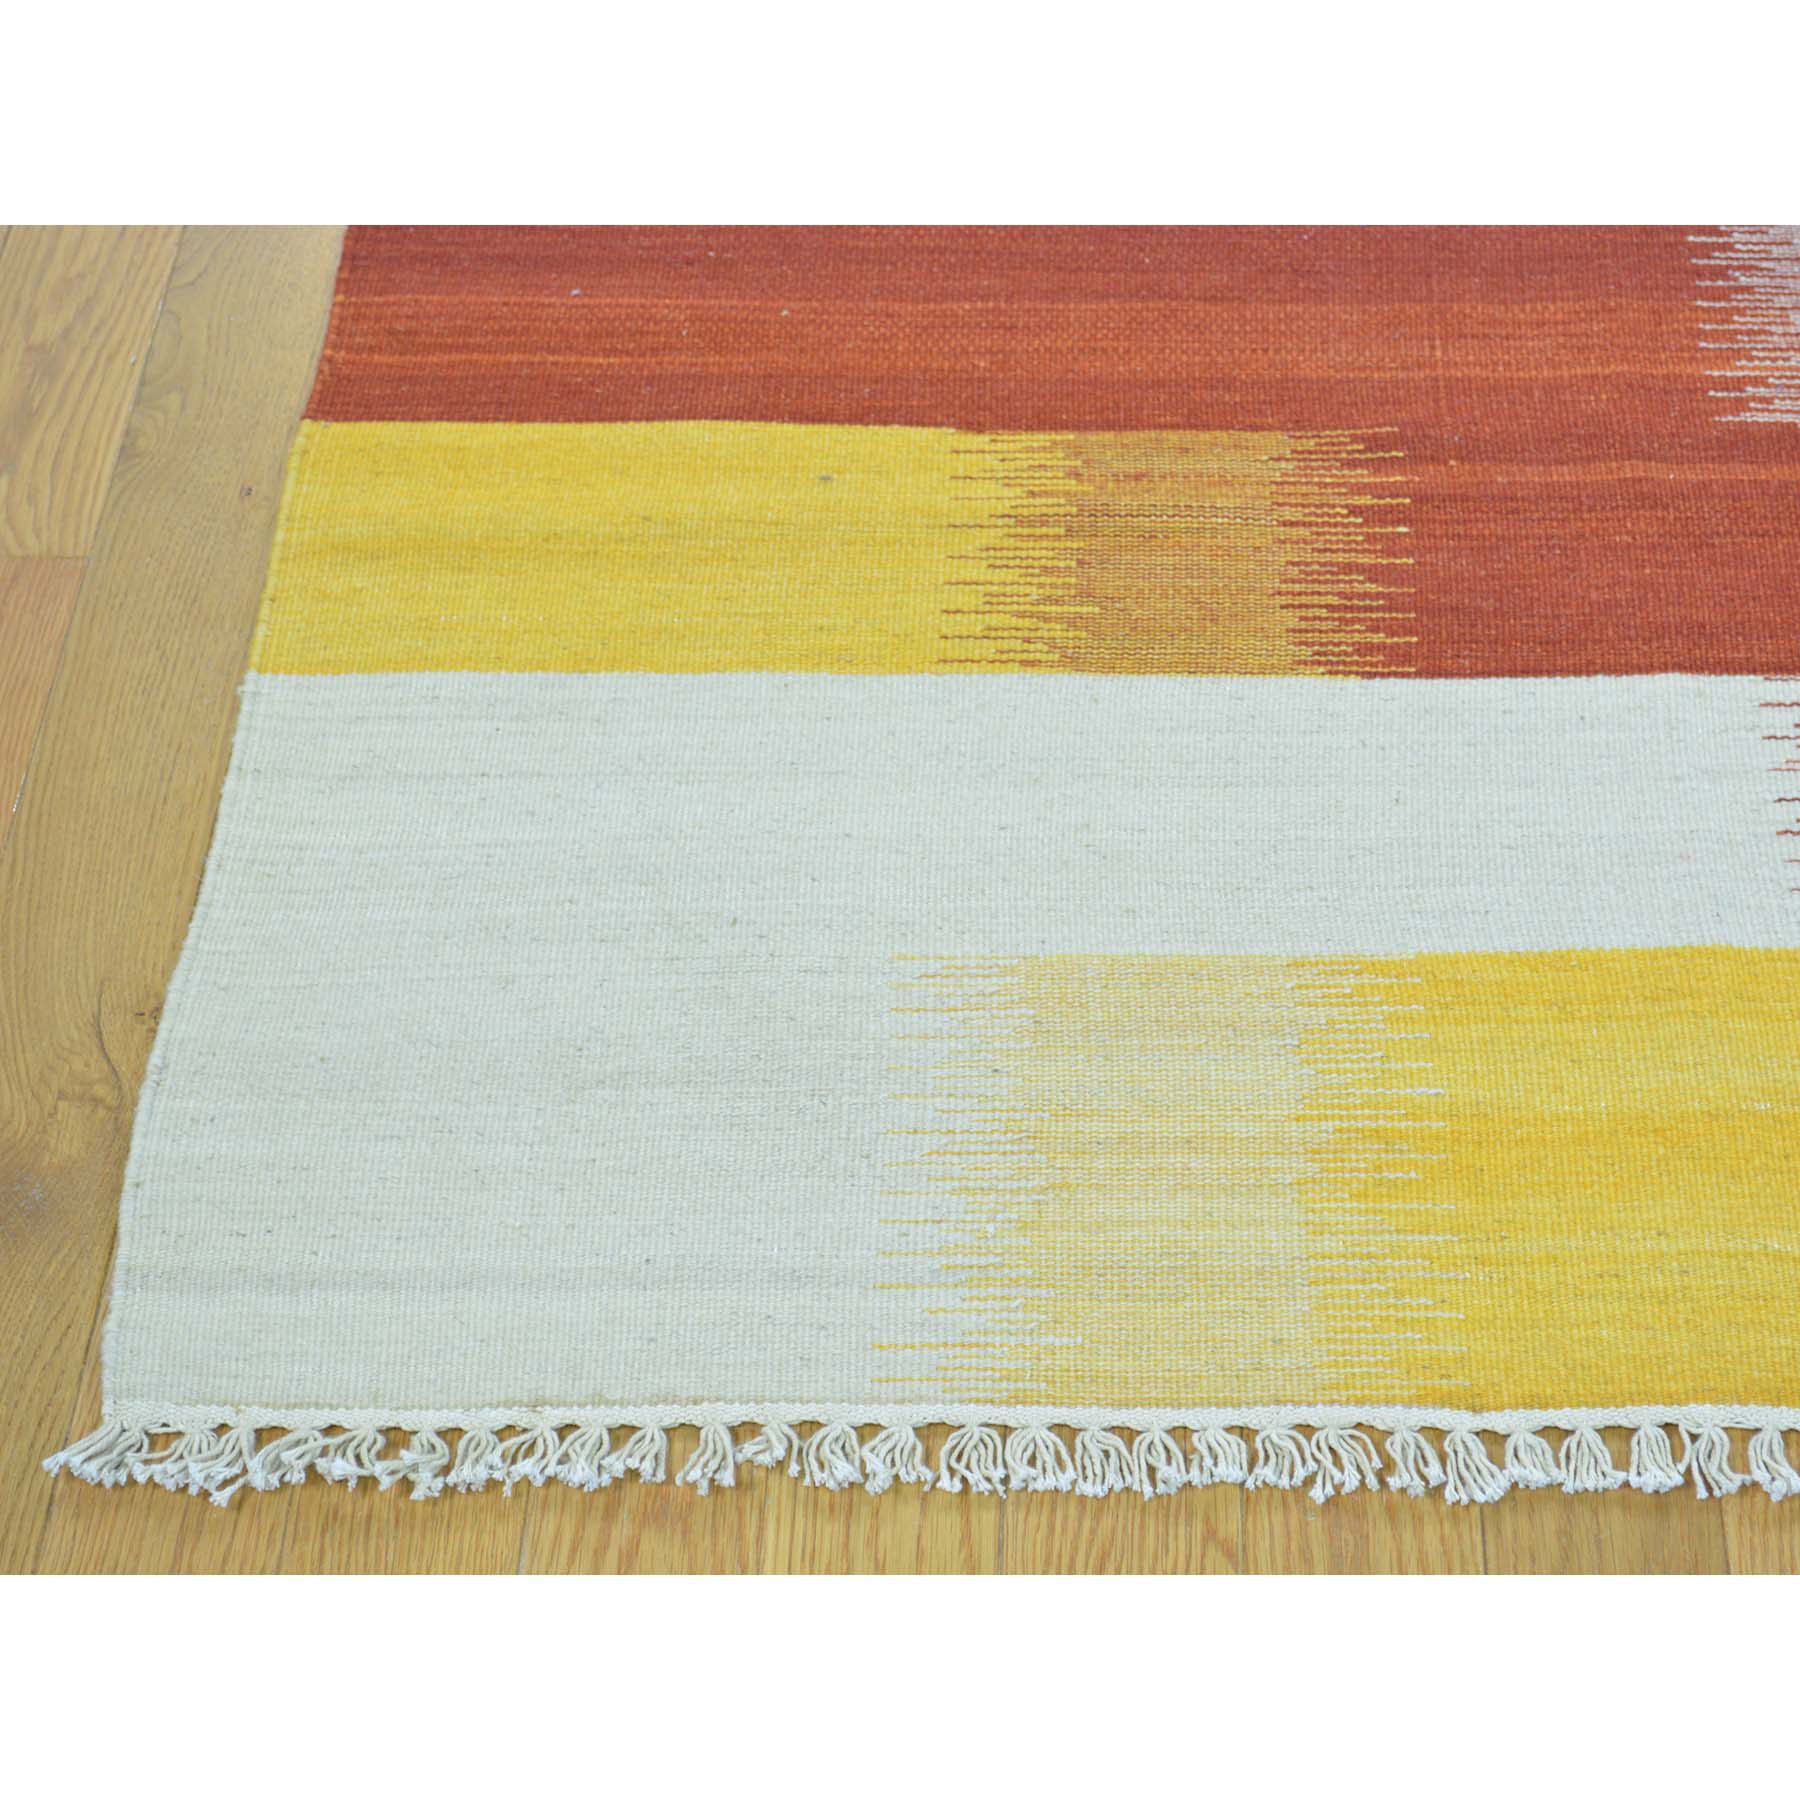 8'x10'3" Colorful Durie Kilim Reversible Flat Weave Hand Woven Rug 